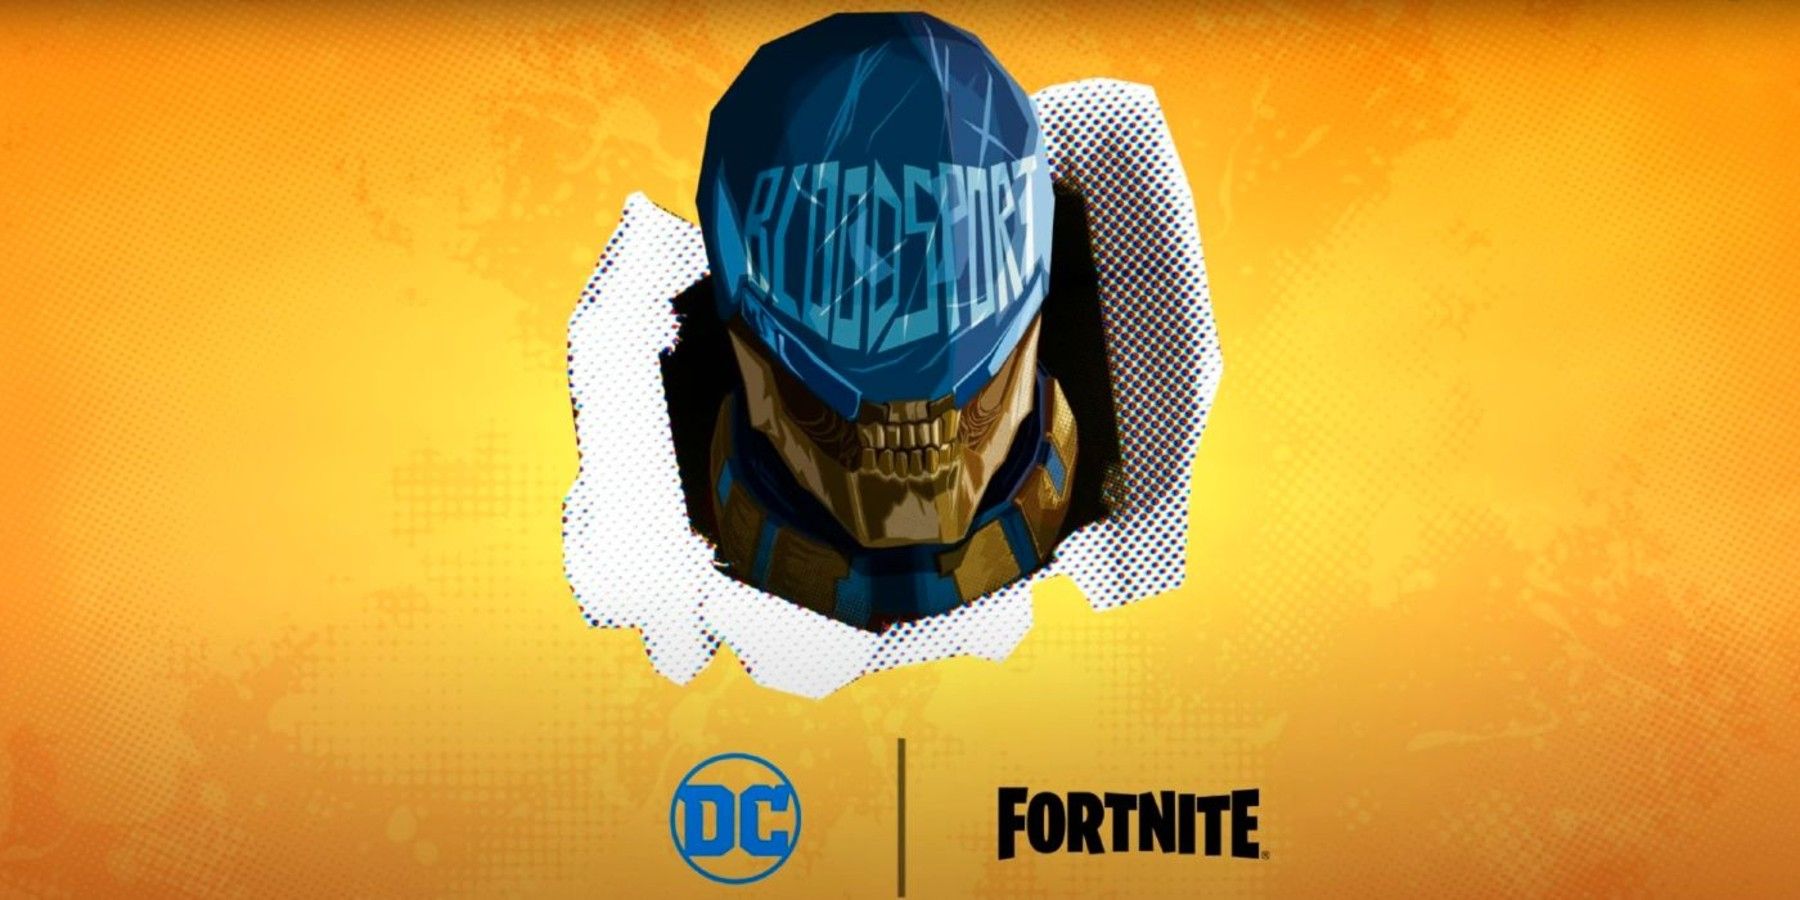 dc character bloodsport in fortnite